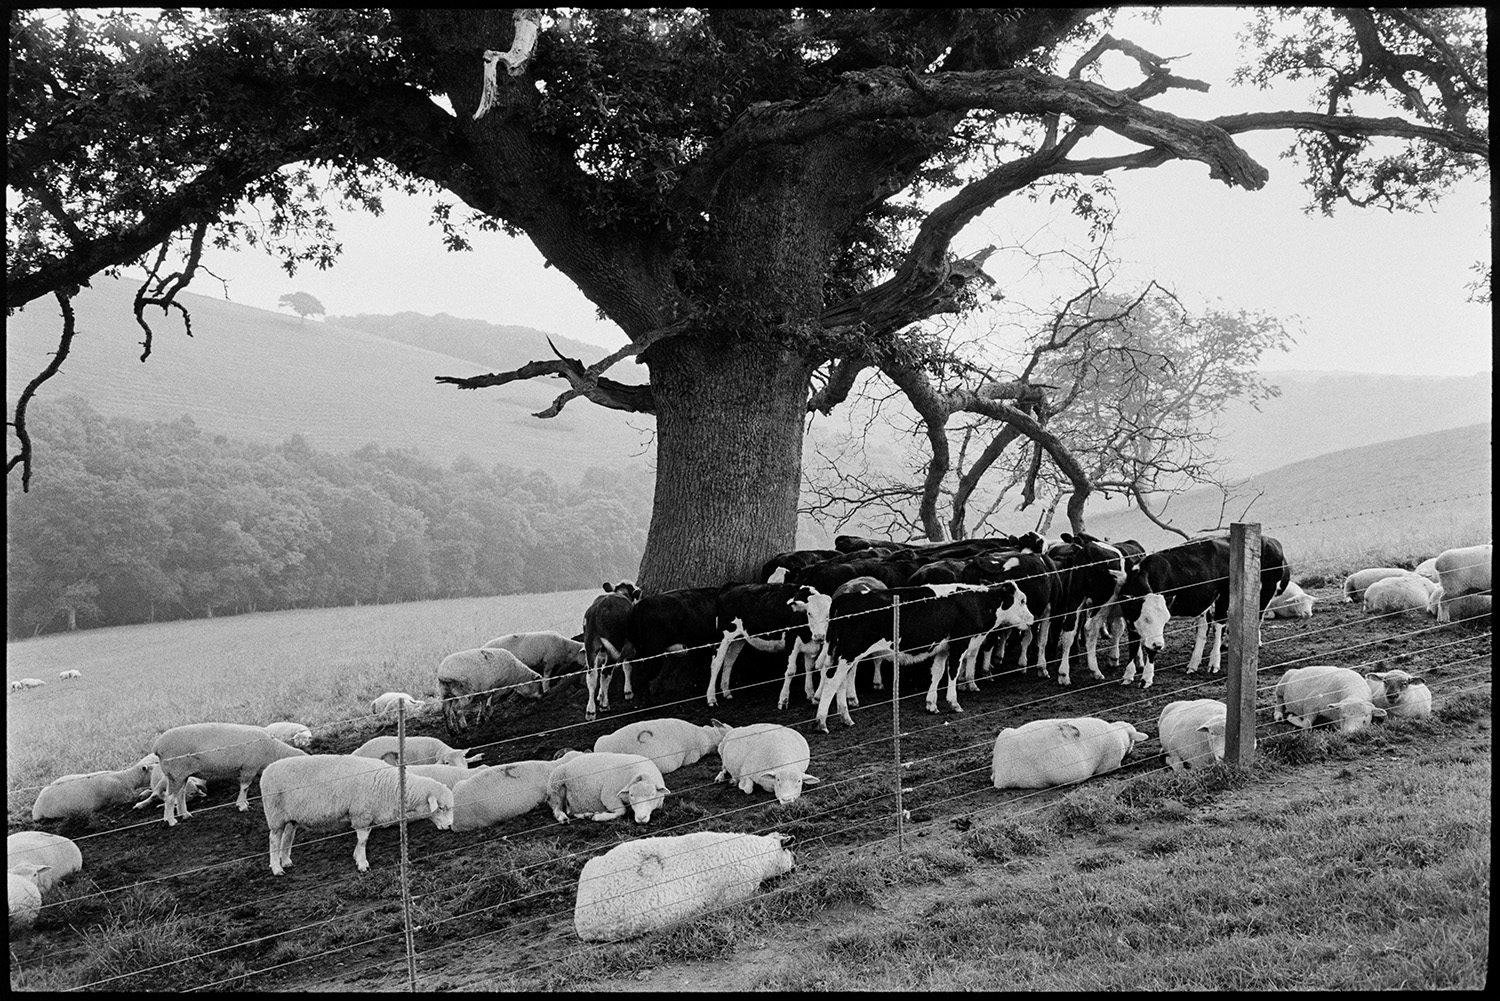 Cattle and sheep keeping cool under tree in heat wave. 
[Cattle and sheep gathered under the shade of a tree to keep cool in the heat, in a field at Densham, Ashreigney. A barbed wire fence can be seen in the foreground.]